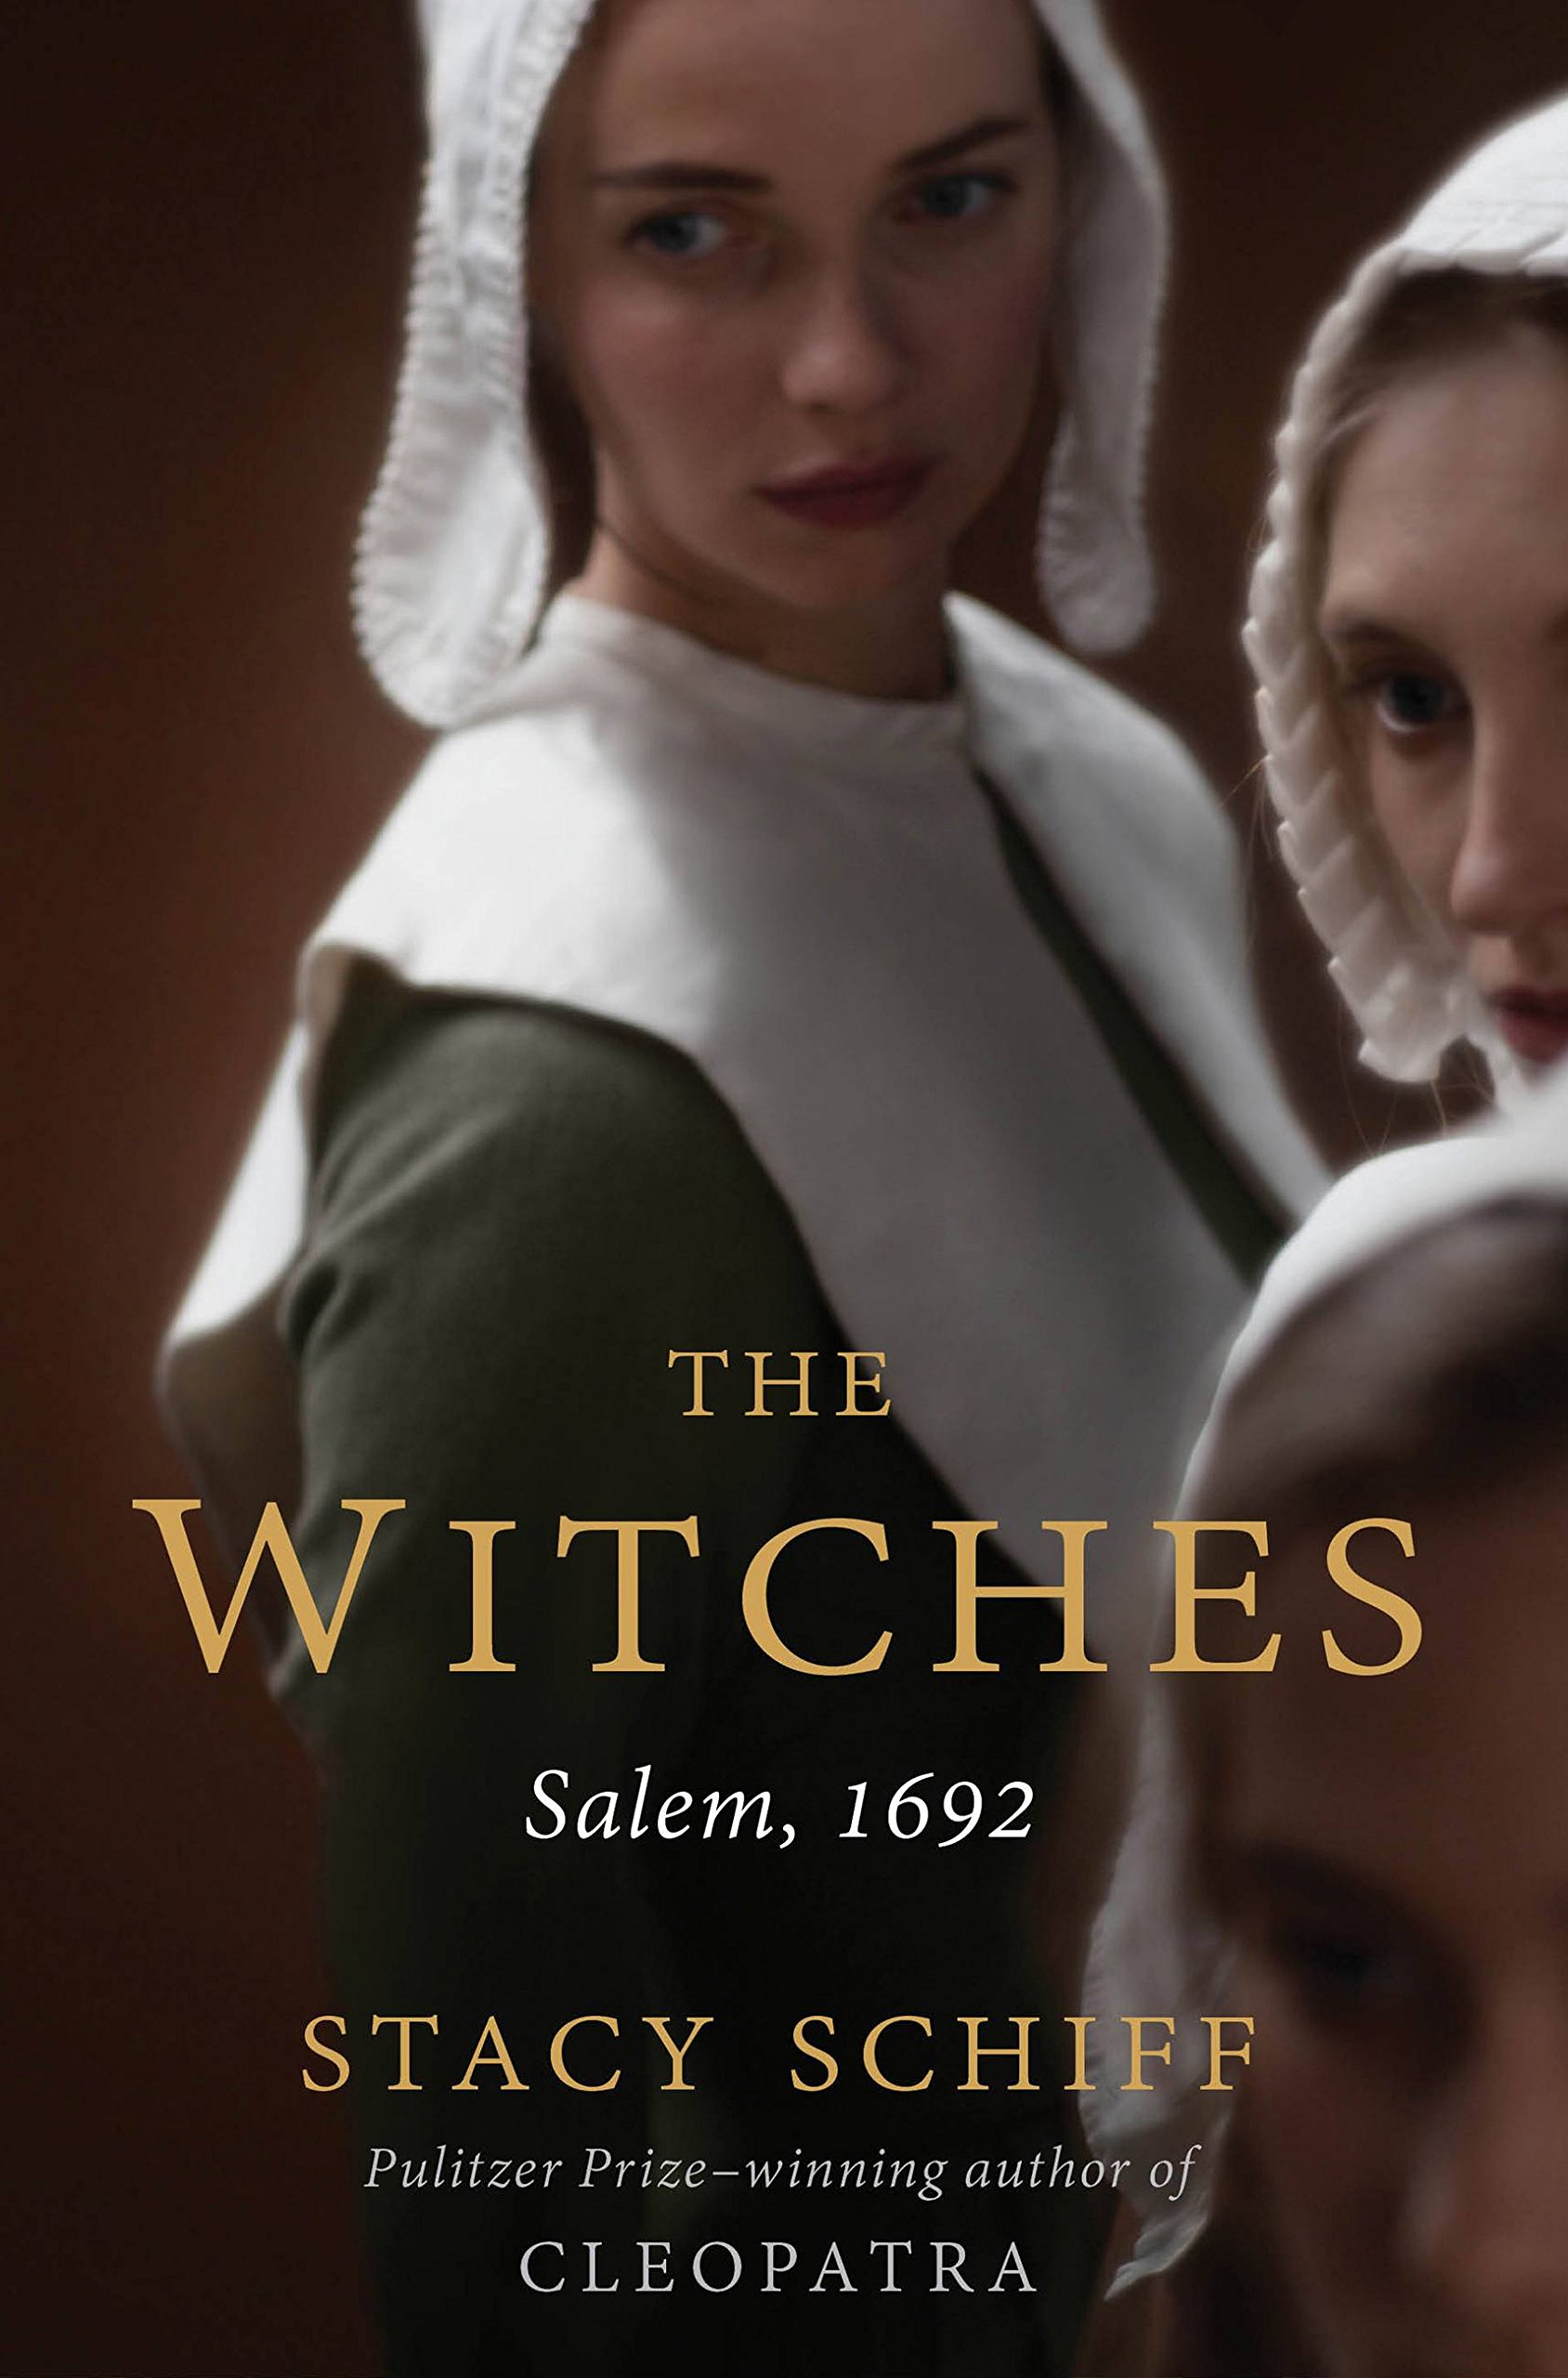 Top 10 Non Fiction The Witches by Stacy Schiff